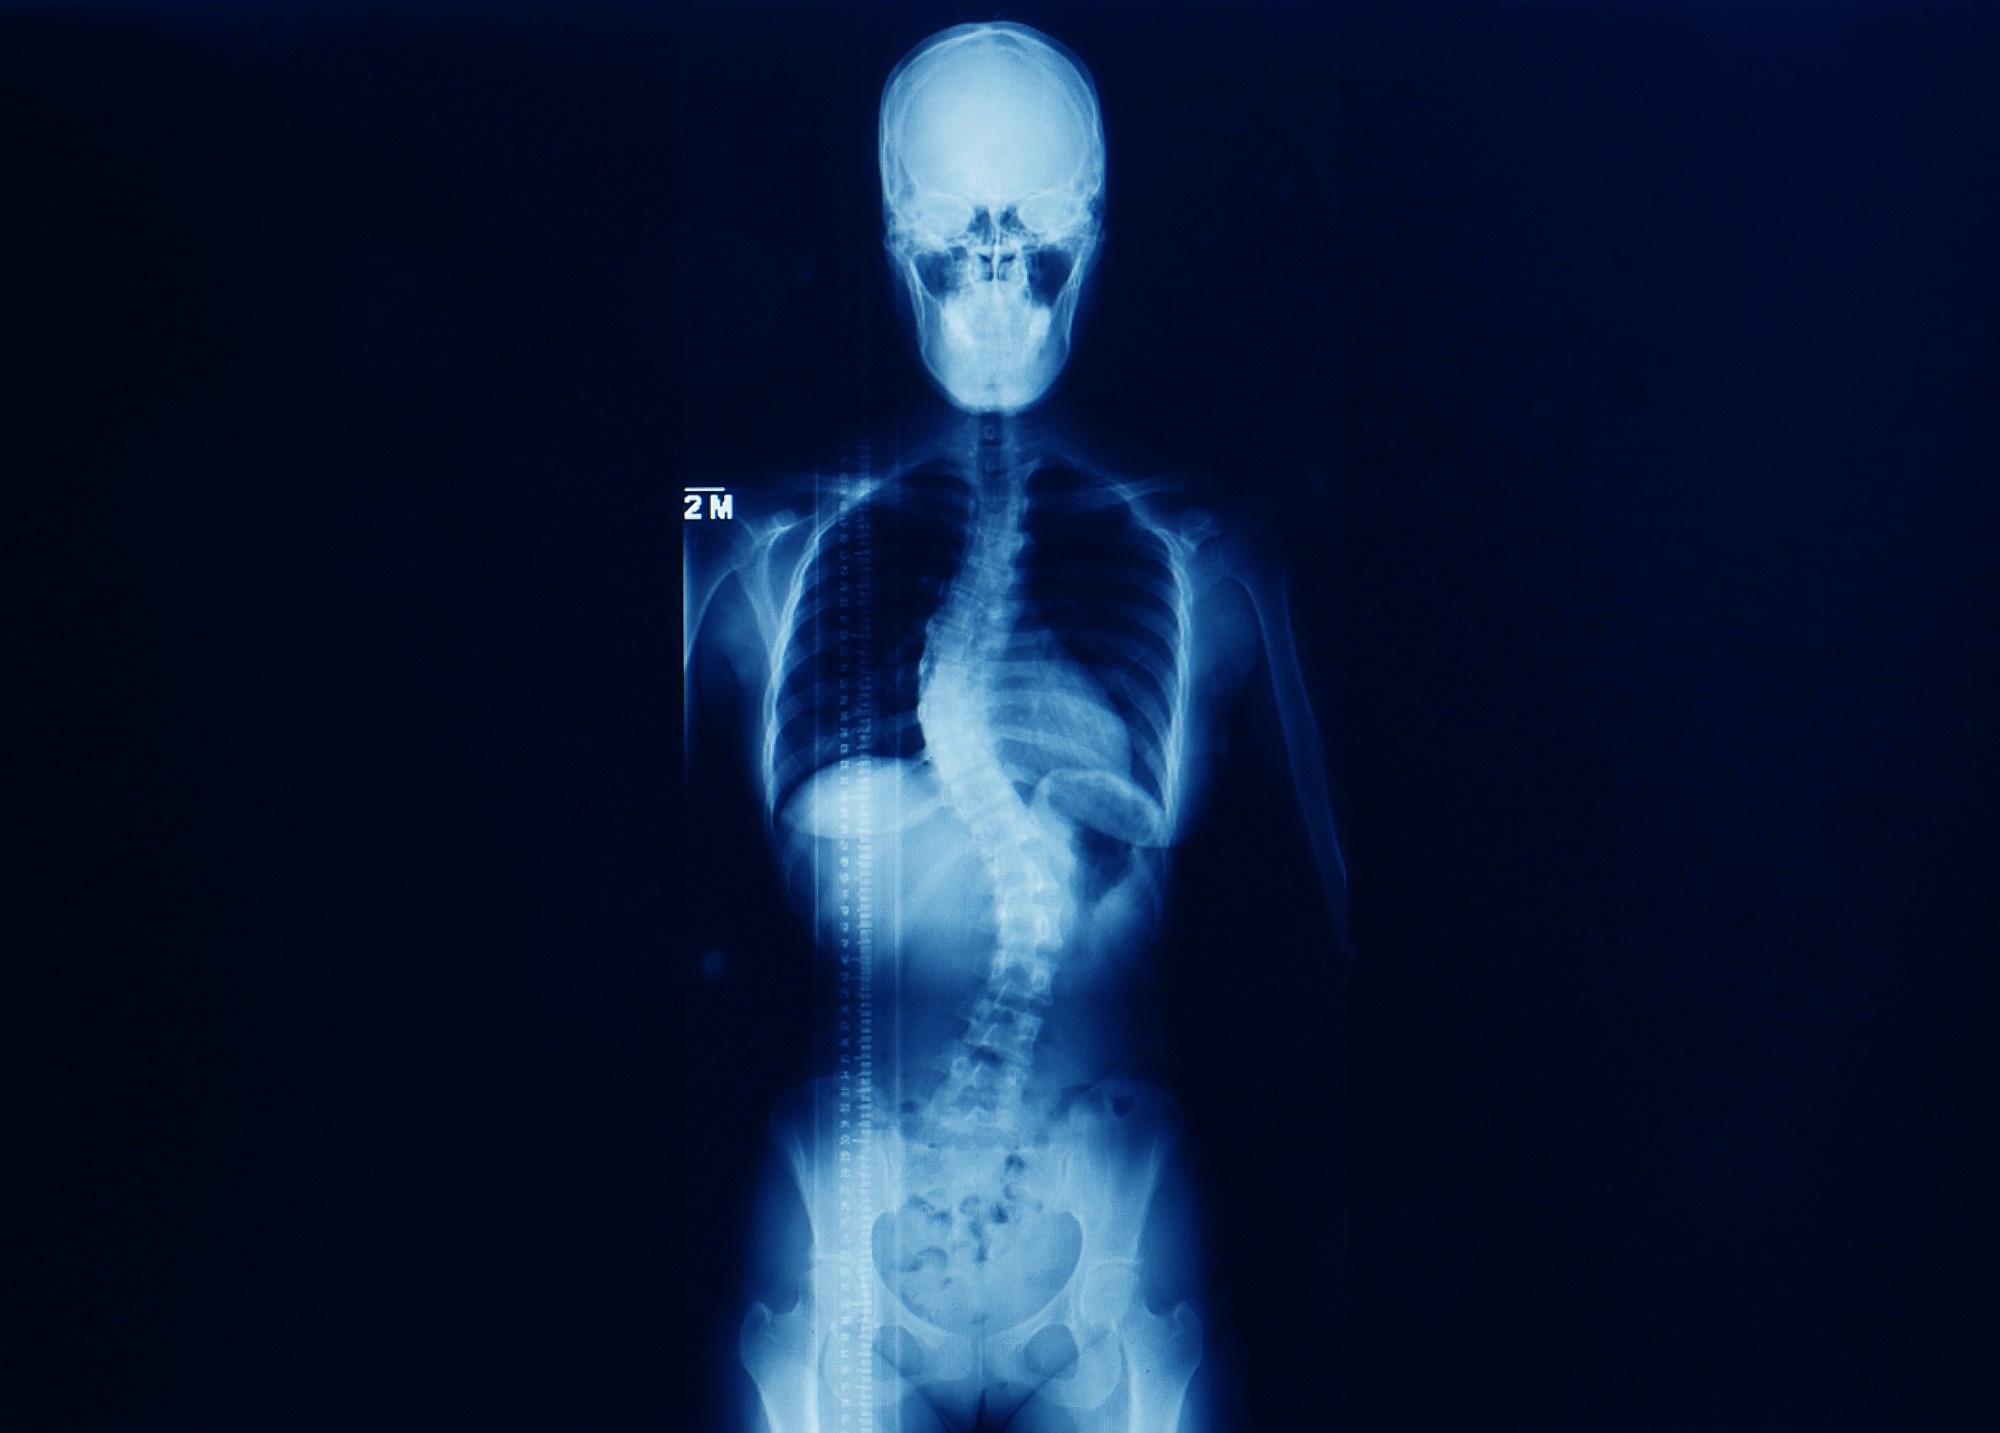 Study: Deep Learning Model to Classify and Monitor Idiopathic Scoliosis in Adolescents Using a Single Smartphone Photograph. Image Credit: Yok_onepiece/Shutterstock.com